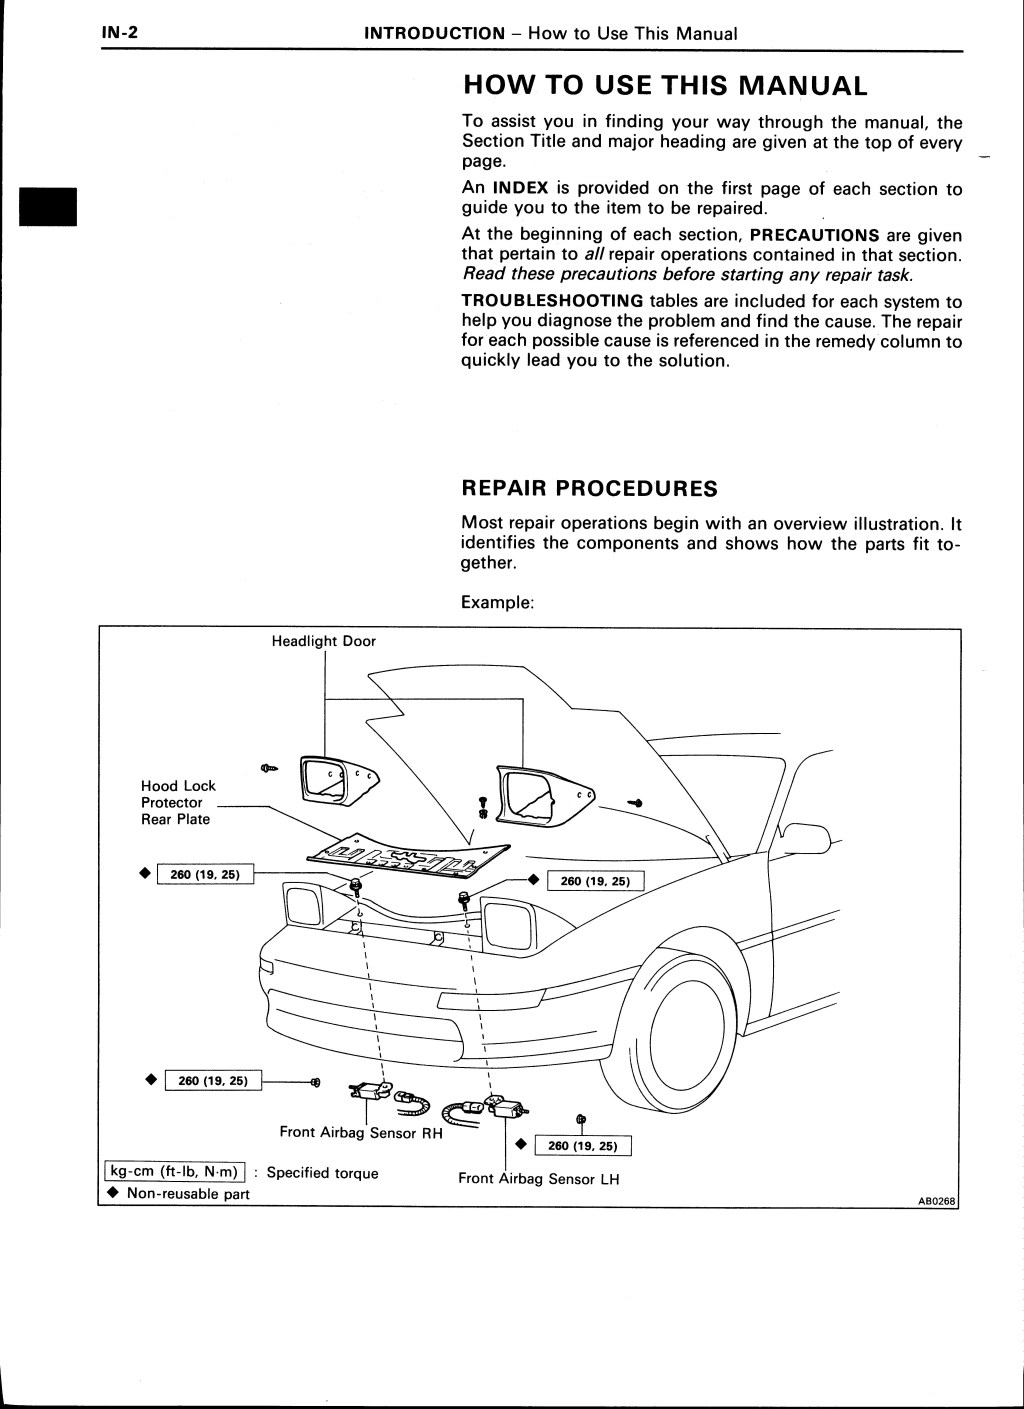 Picture of: Toyota MR Service Repair Manual by kmdisiodok – Issuu